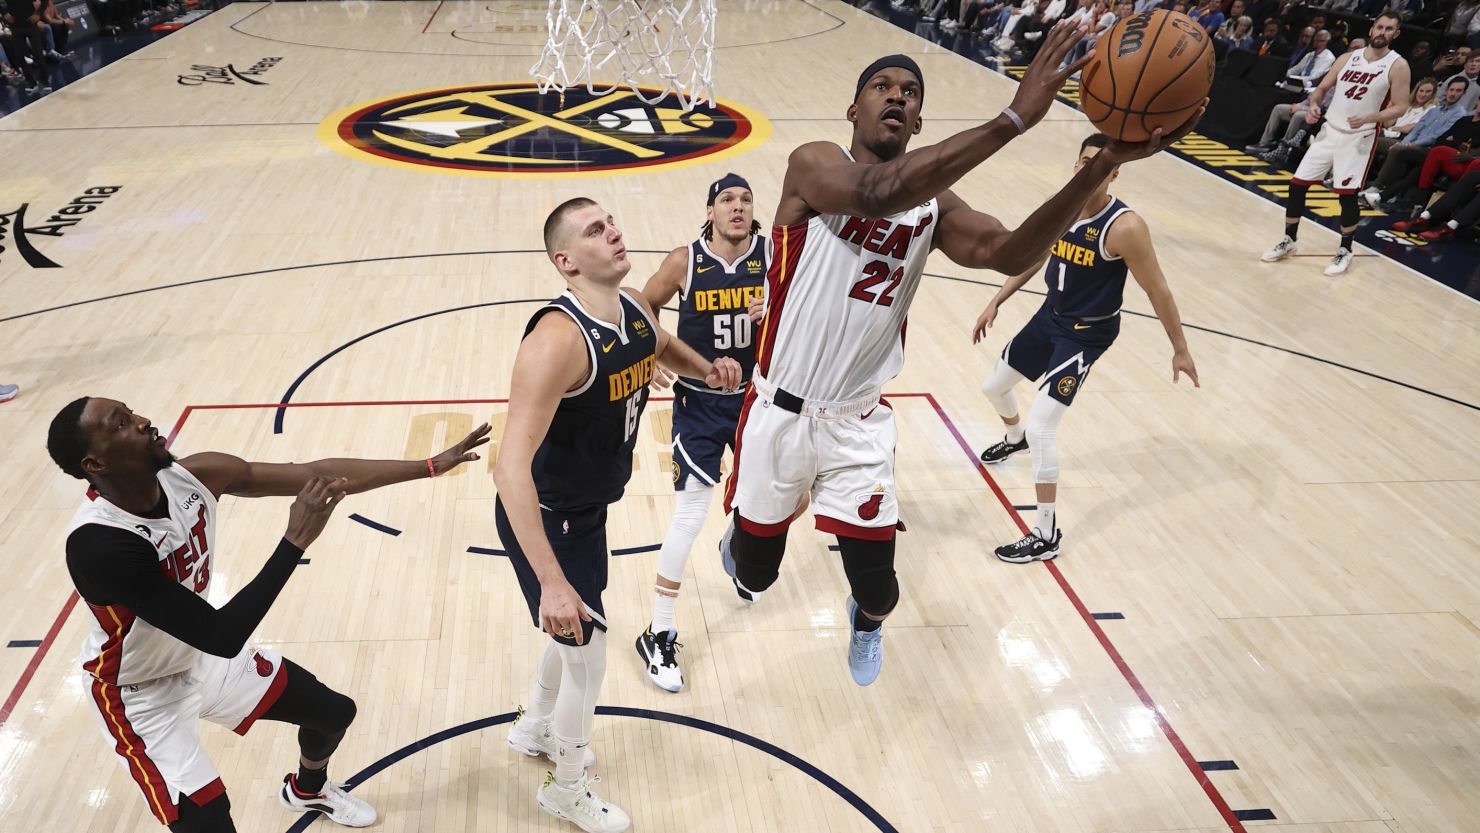 The Miami Heat took Game 2 against the Denver Nuggets after a fourth quarter surge.